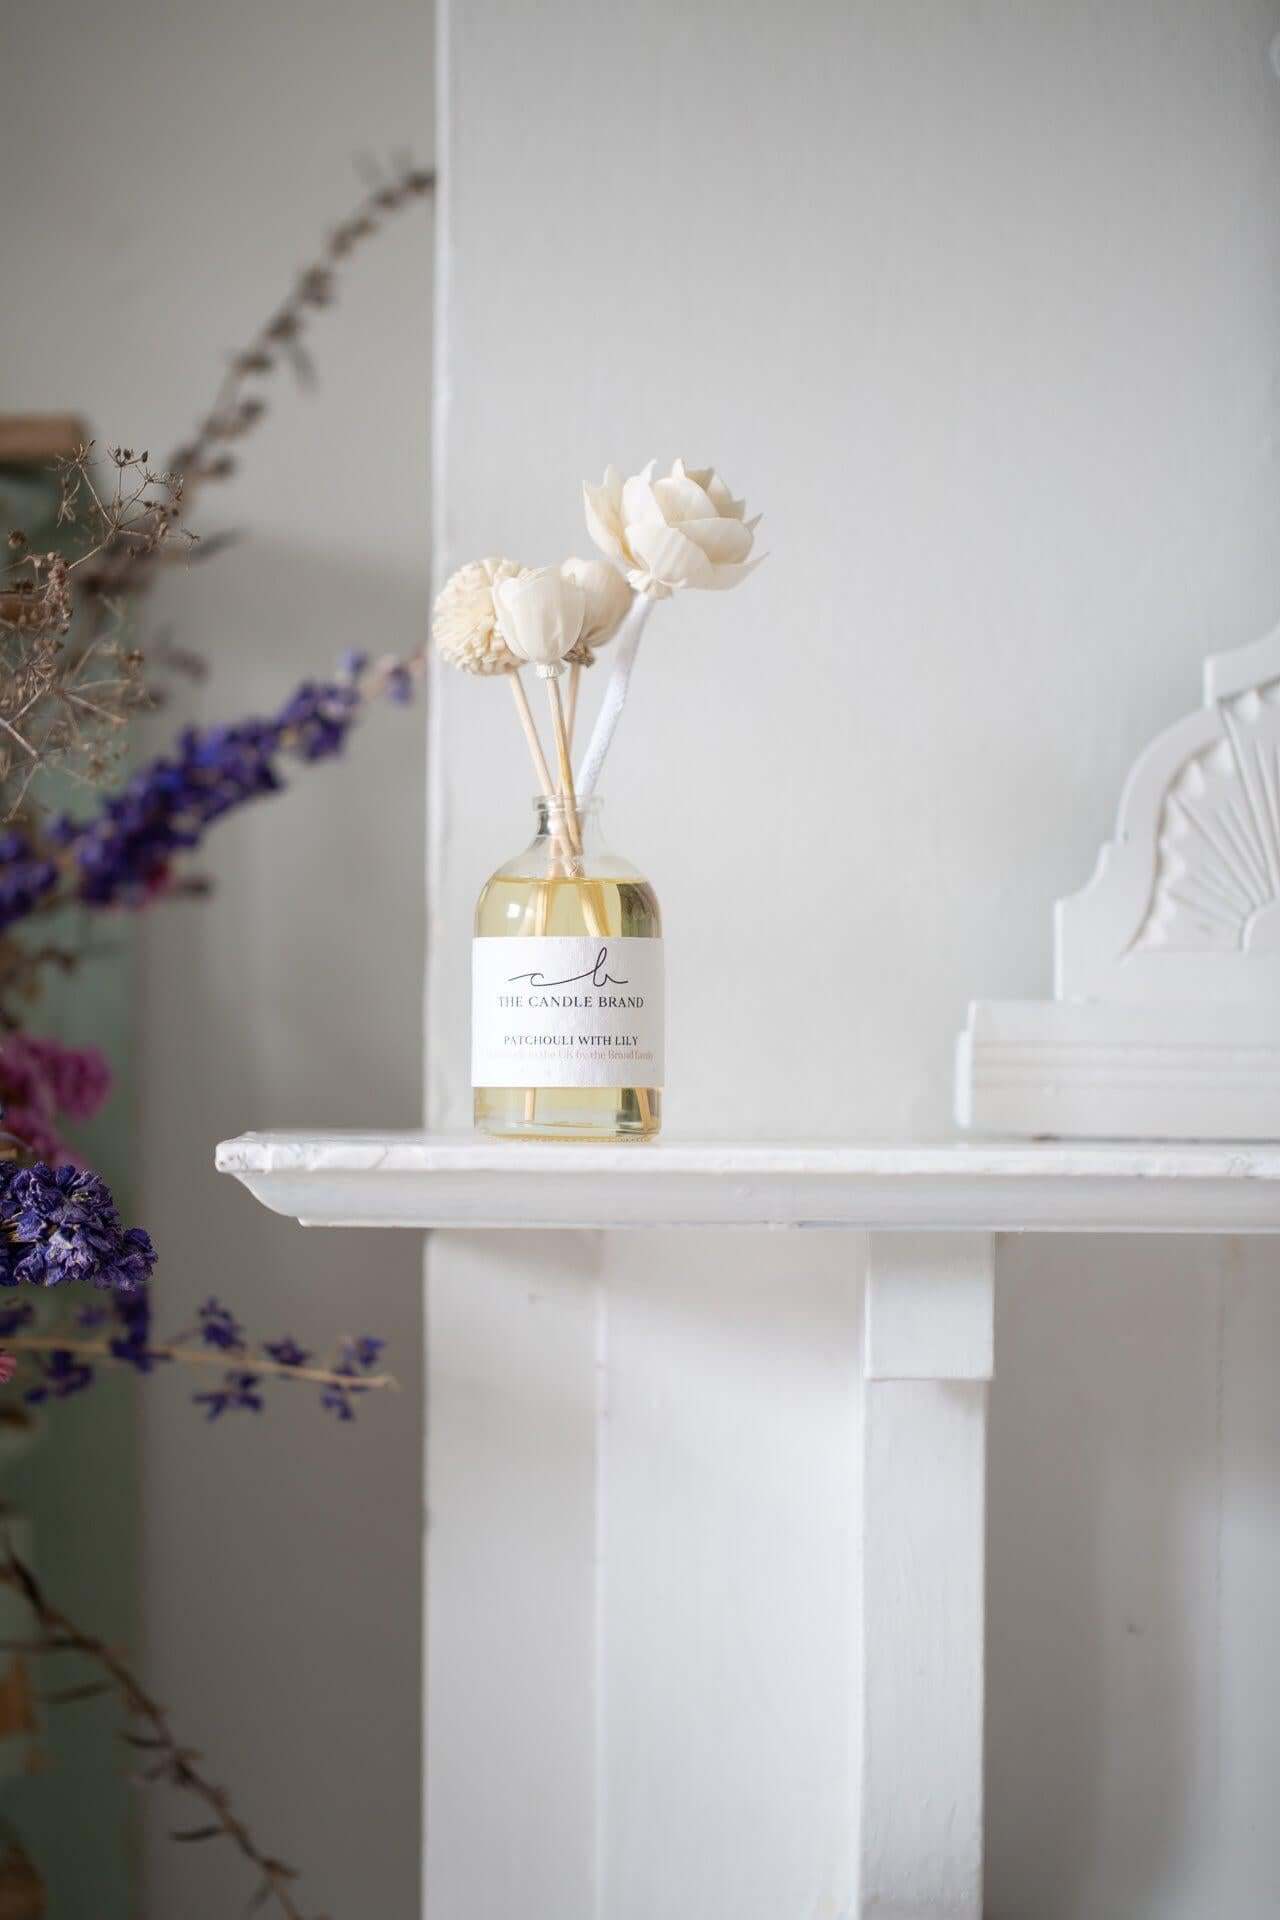 Eco-Friendly Very Vanilla Flower Diffuser The Candle Brand Home Fragrance